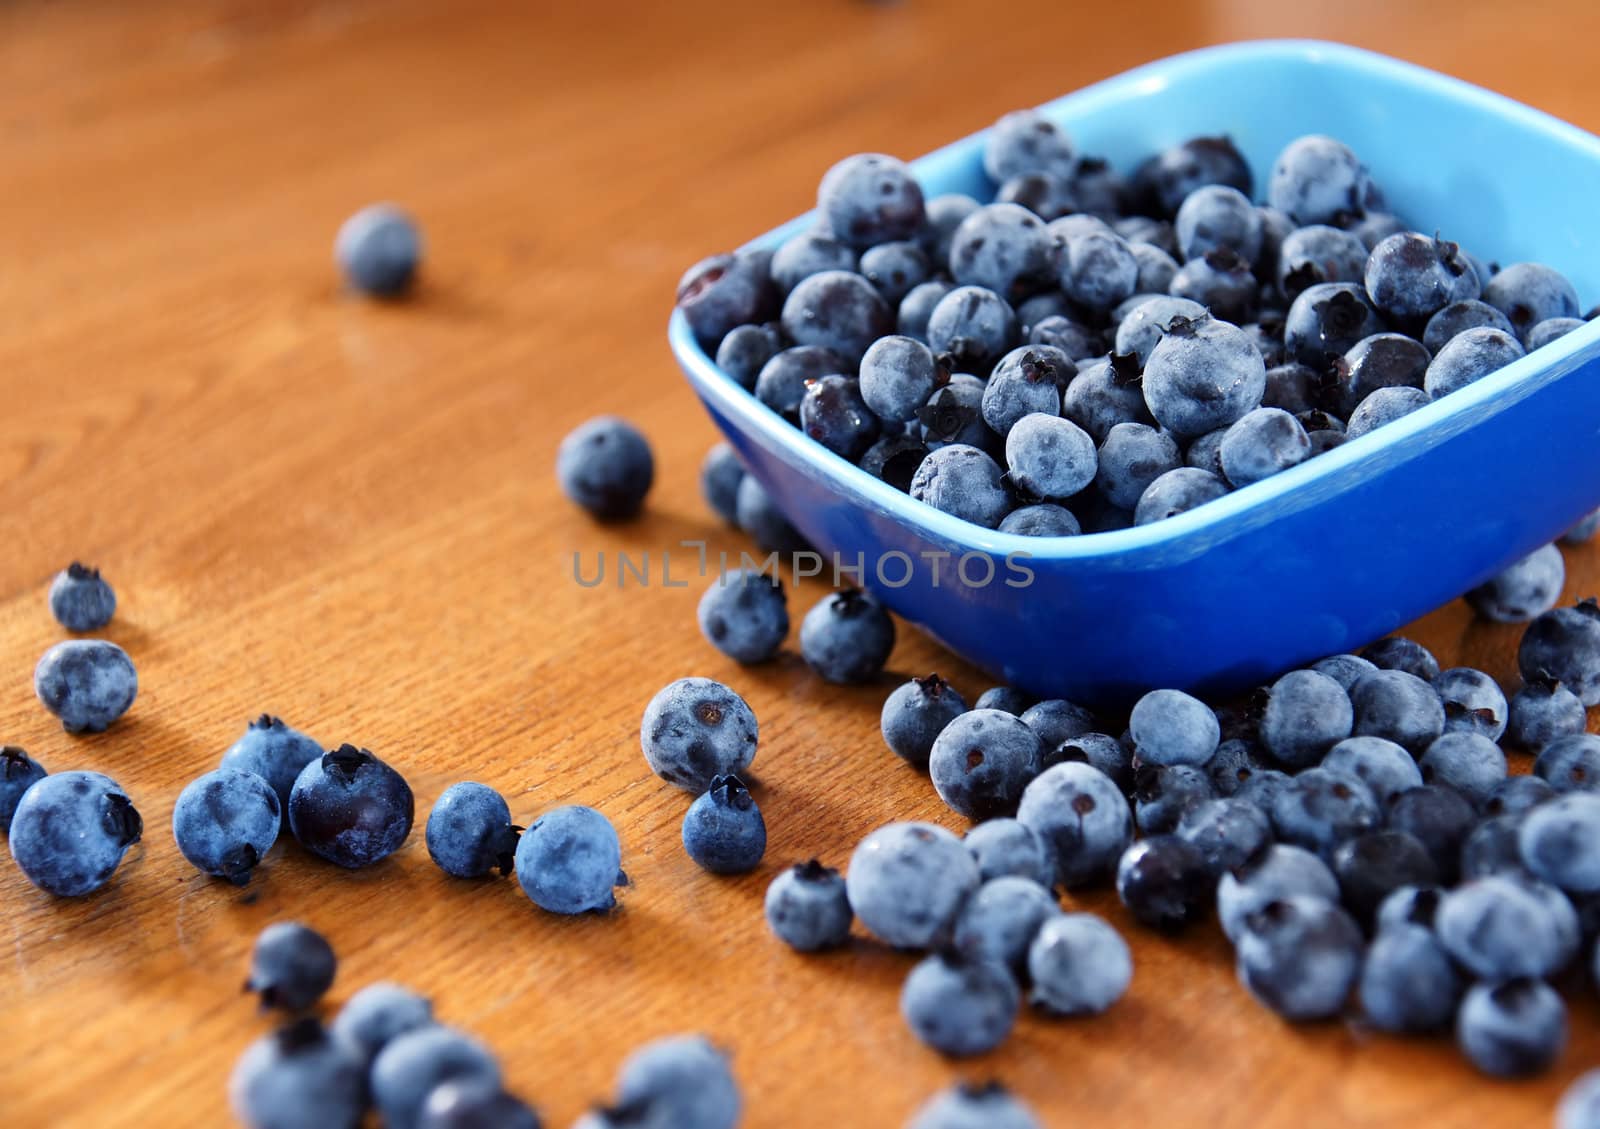 Blueberries on table by Mirage3